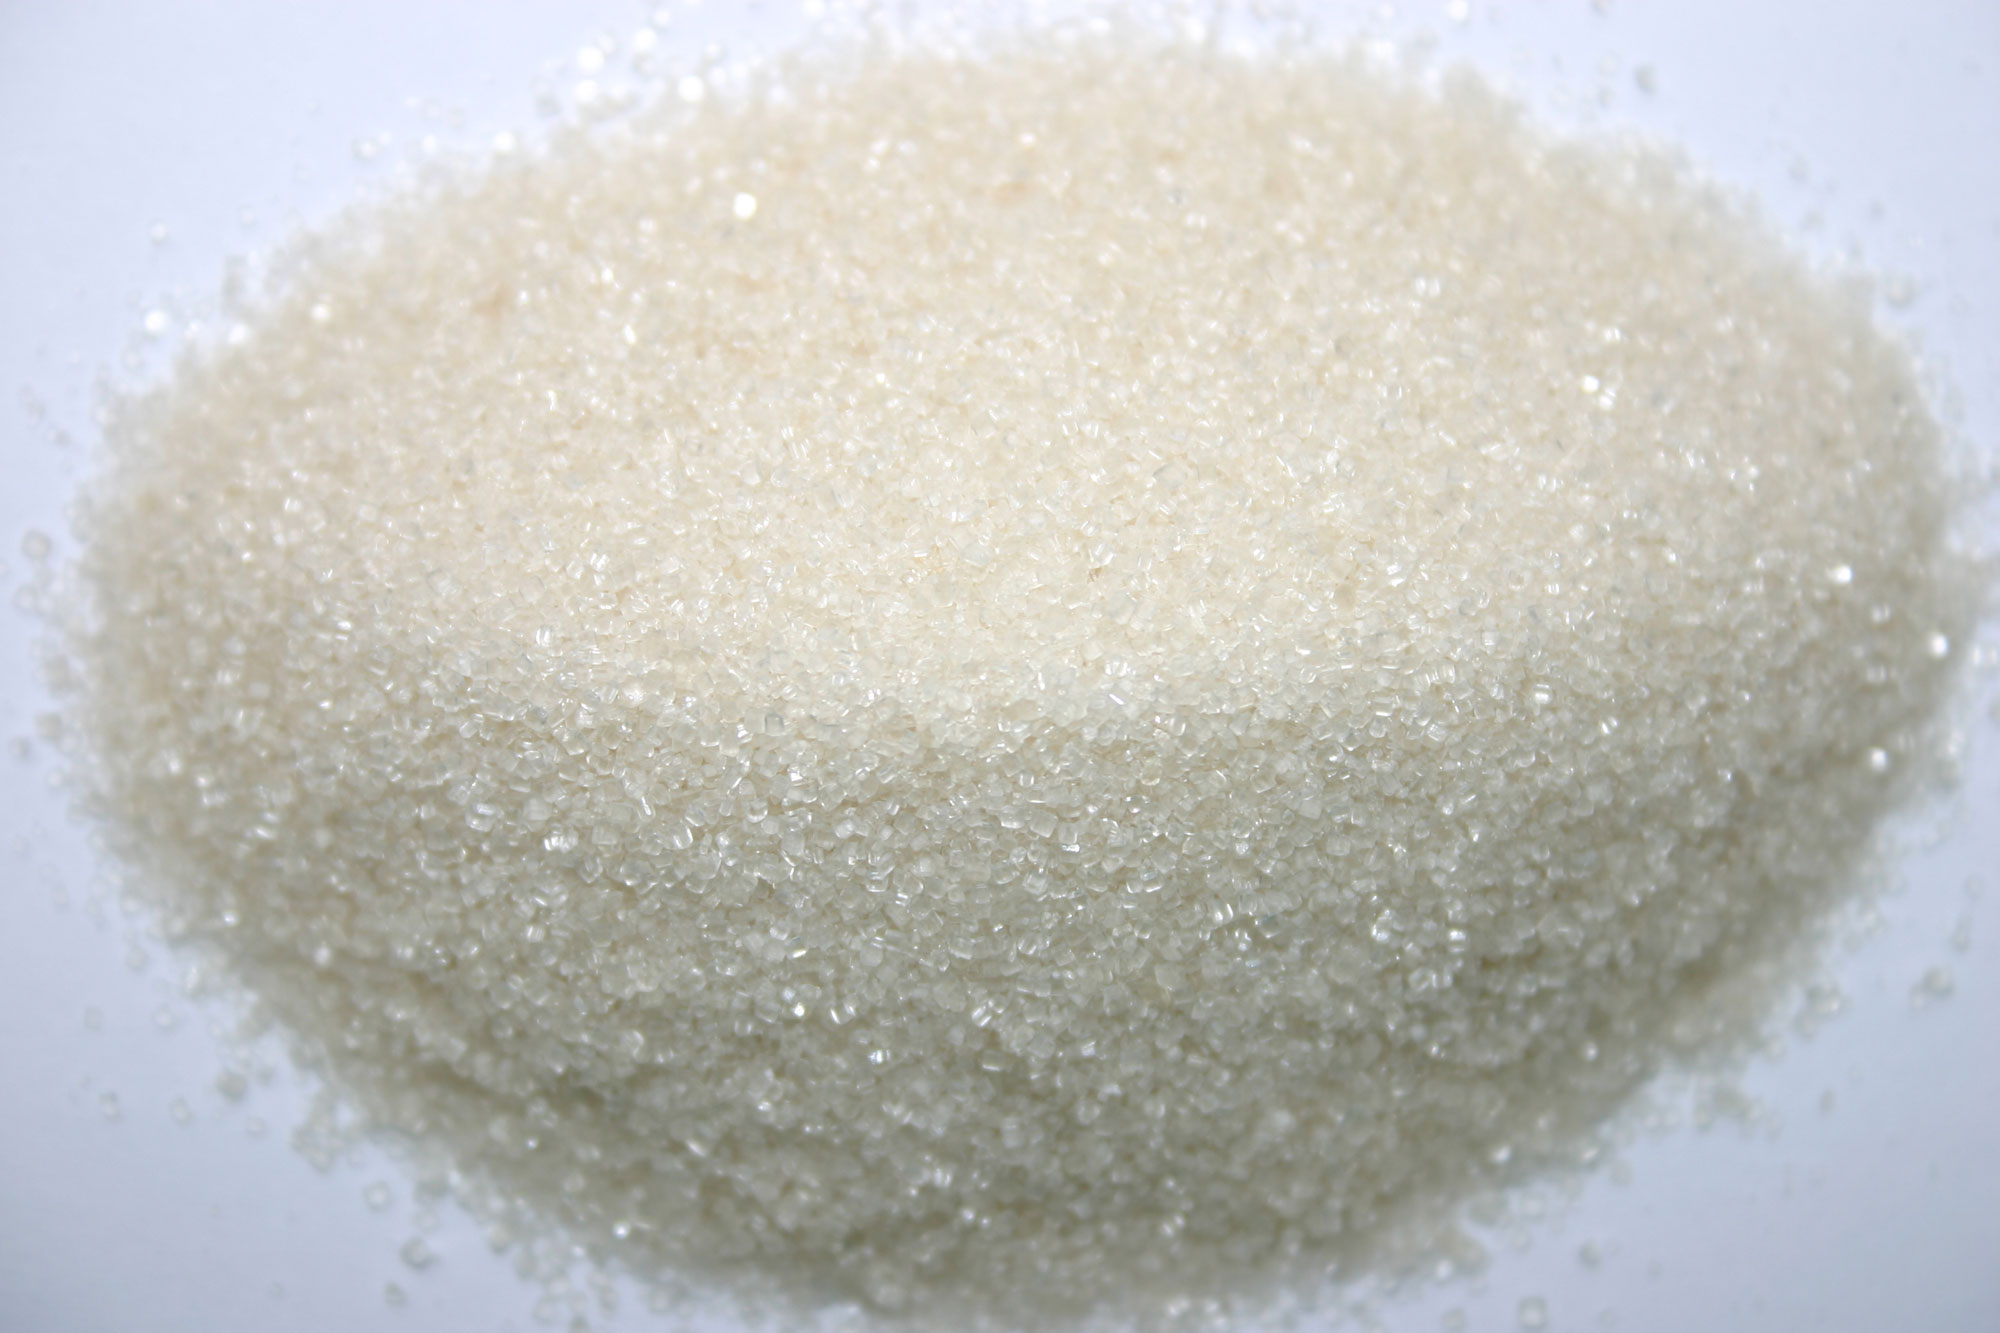 Photograph of a pile of white sugar. The photo shows white crystalline sugar on a white background.